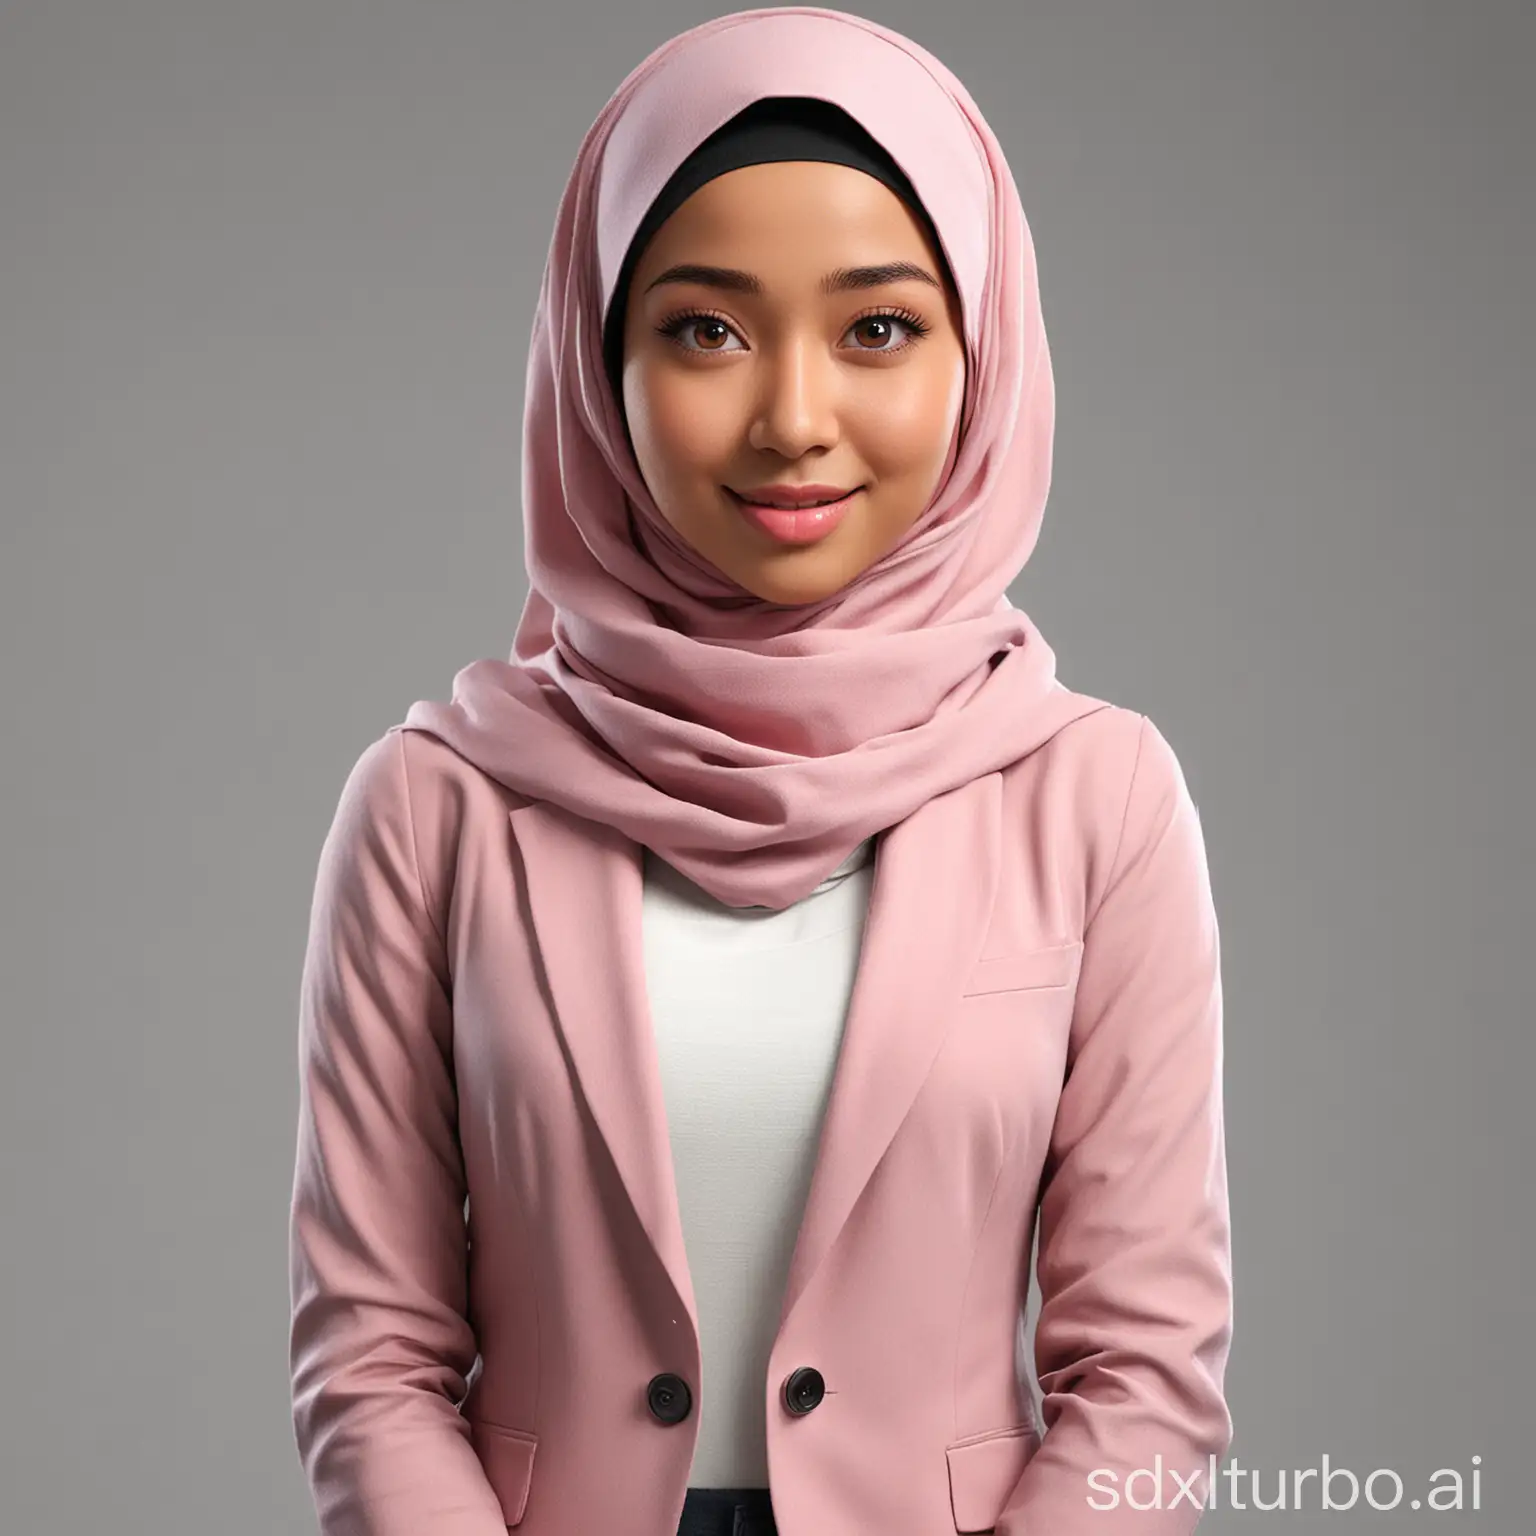 Create a full 3D cartoon style body with a big head. A 25 year old Indonesian woman. Tall, slightly full body, oval face shape. beautiful, slightly round eyes, clean white skin, thin sweet smile. wearing a hijab, pink blazer, white undershirt, body position clearly visible. The background is solid white. Use soft photography lighting, hair lighting, top lighting, side lighting. Highest quality photos, Uhd,16k